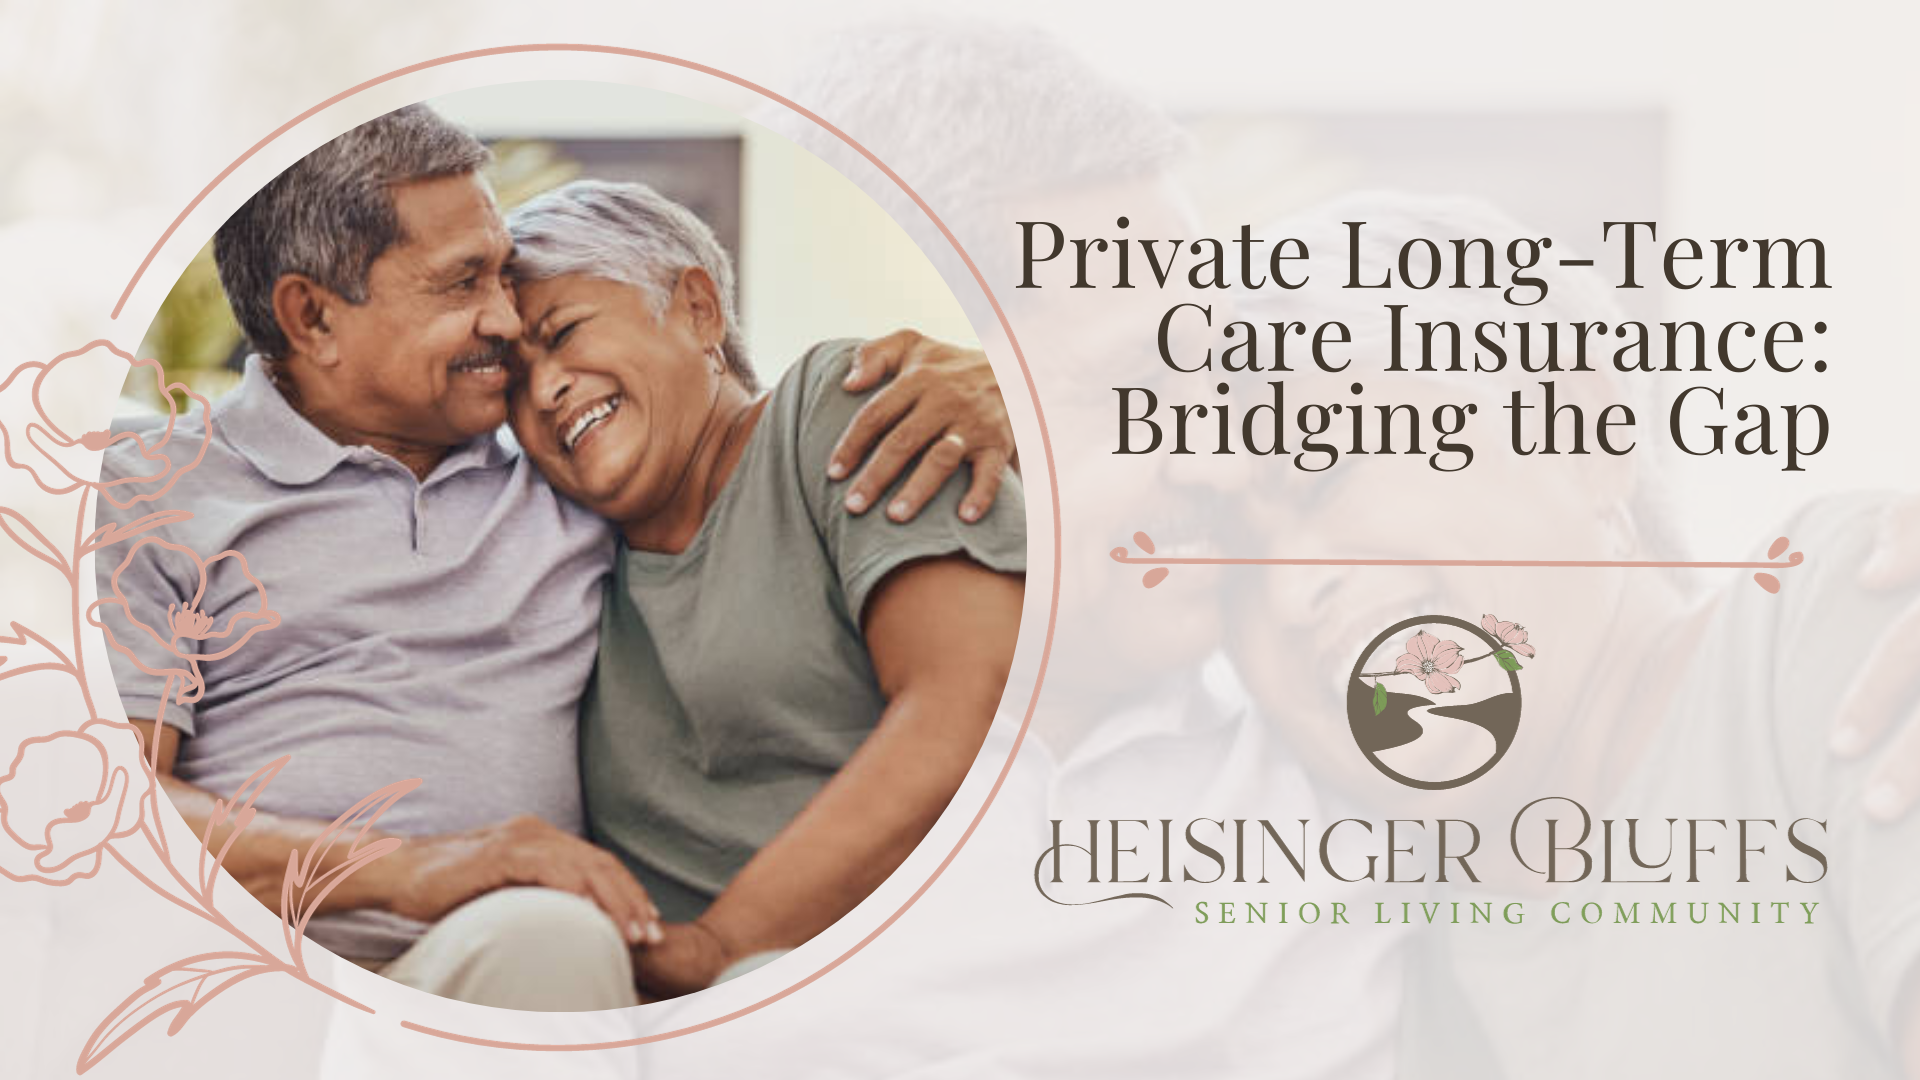 Private Long-Term Care Insurance is a robust solution designed to cover costs not typically addressed by Medicare or Medicaid